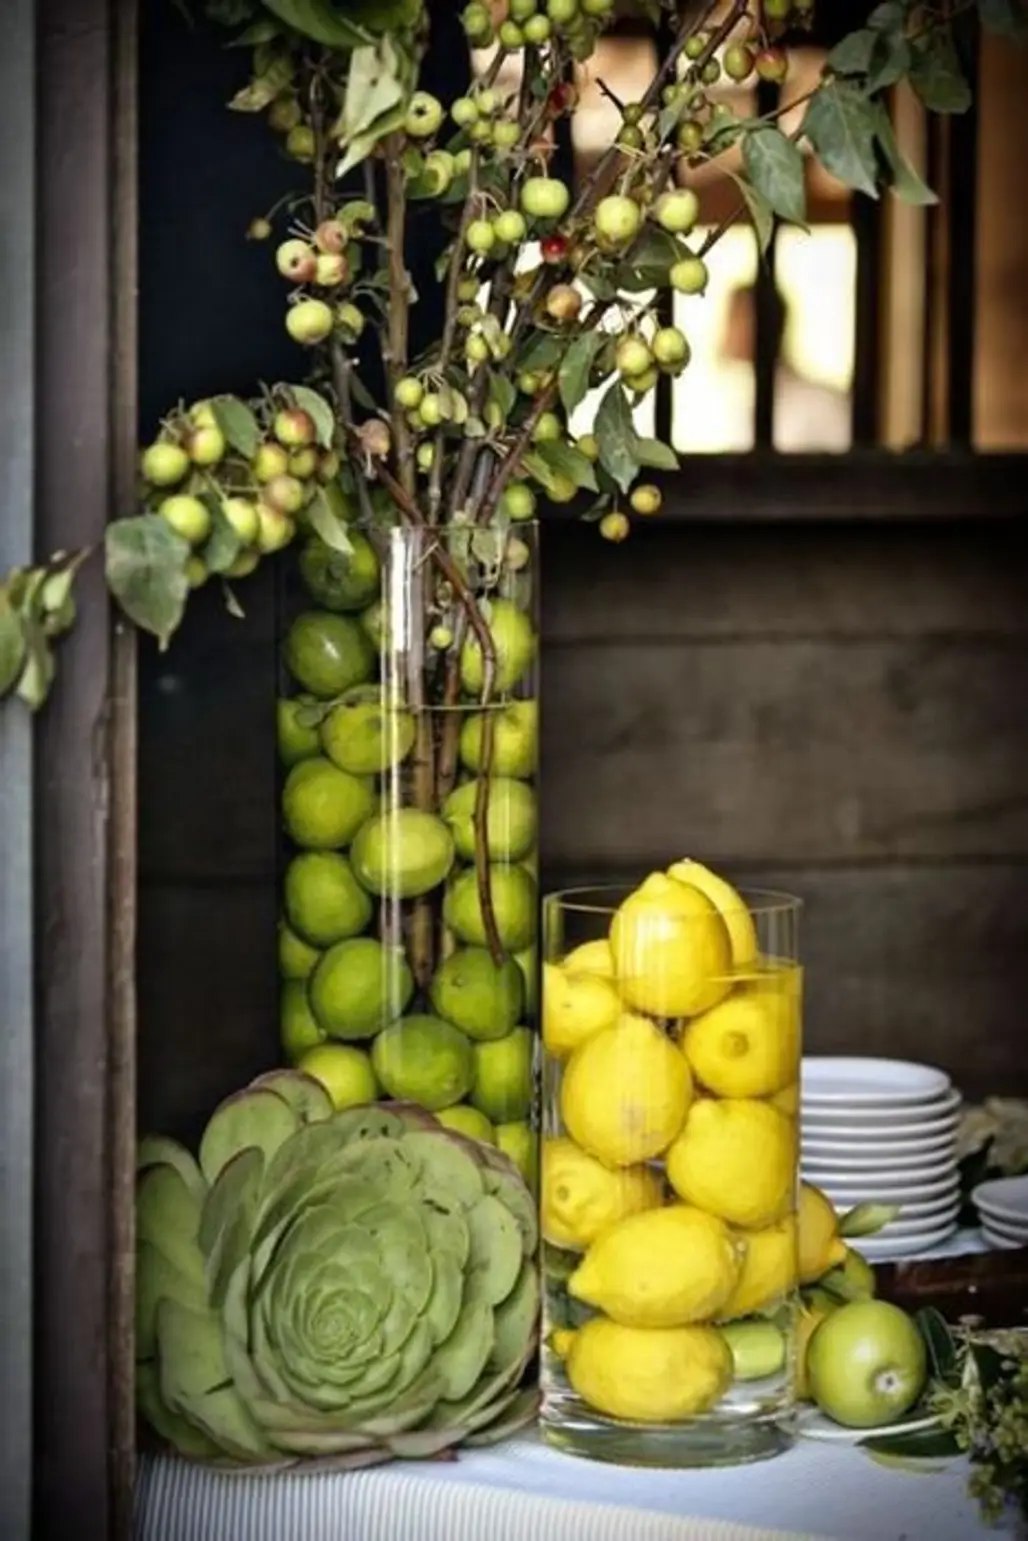 green,yellow,food,plant,produce,